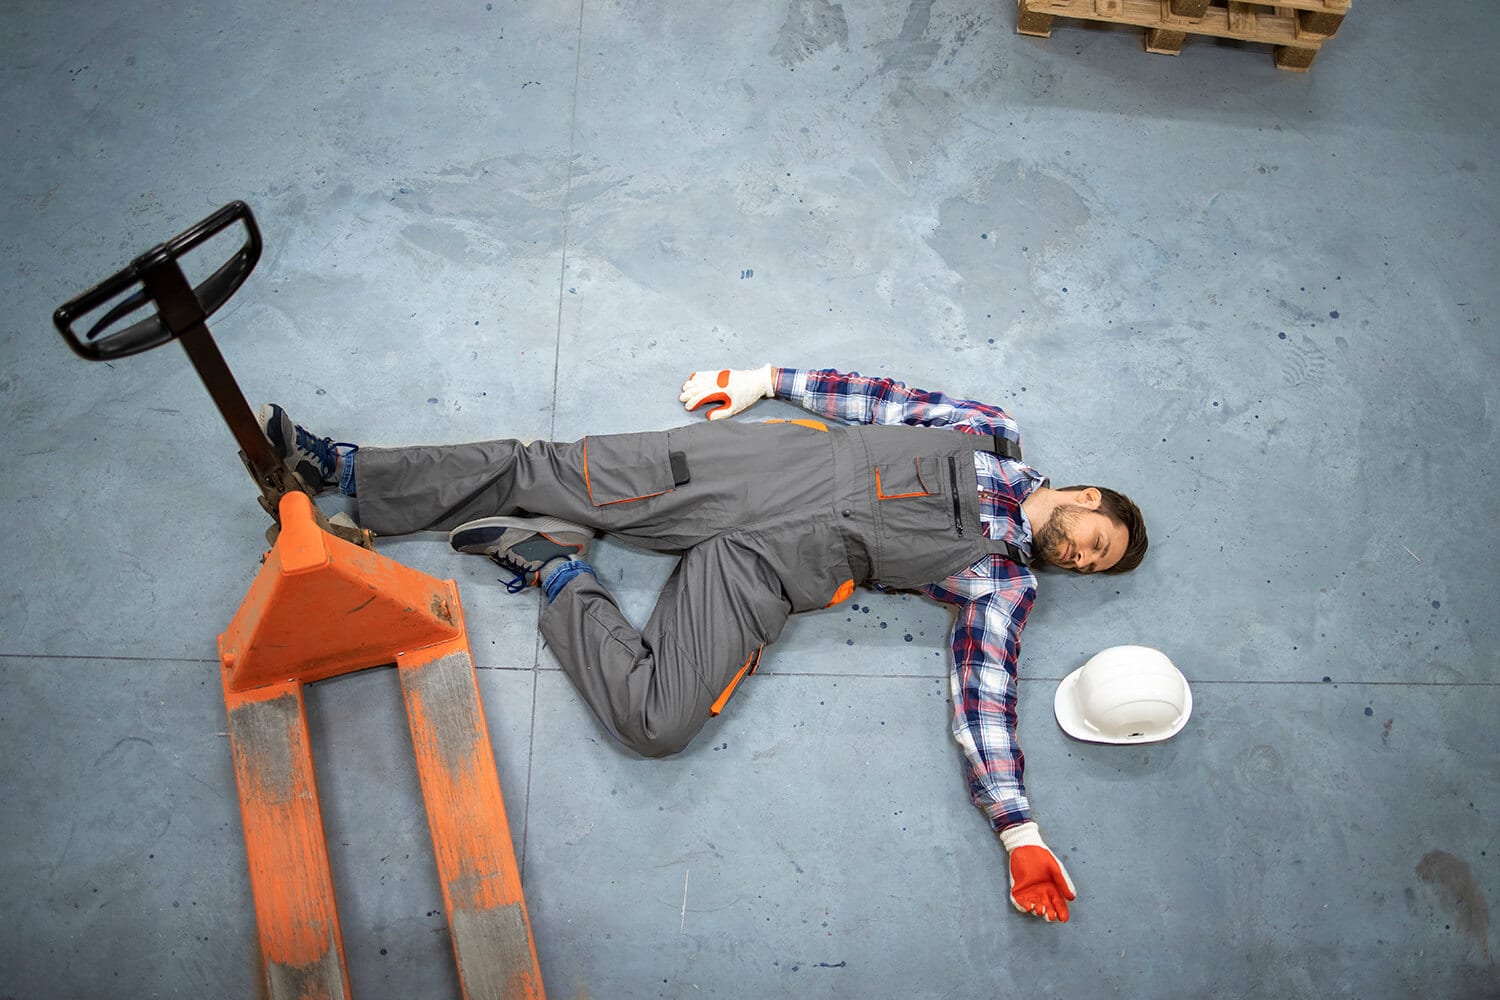 6 Key Factors to Consider When Filing a Premises Liability or Slip-And-Fall Lawsuit